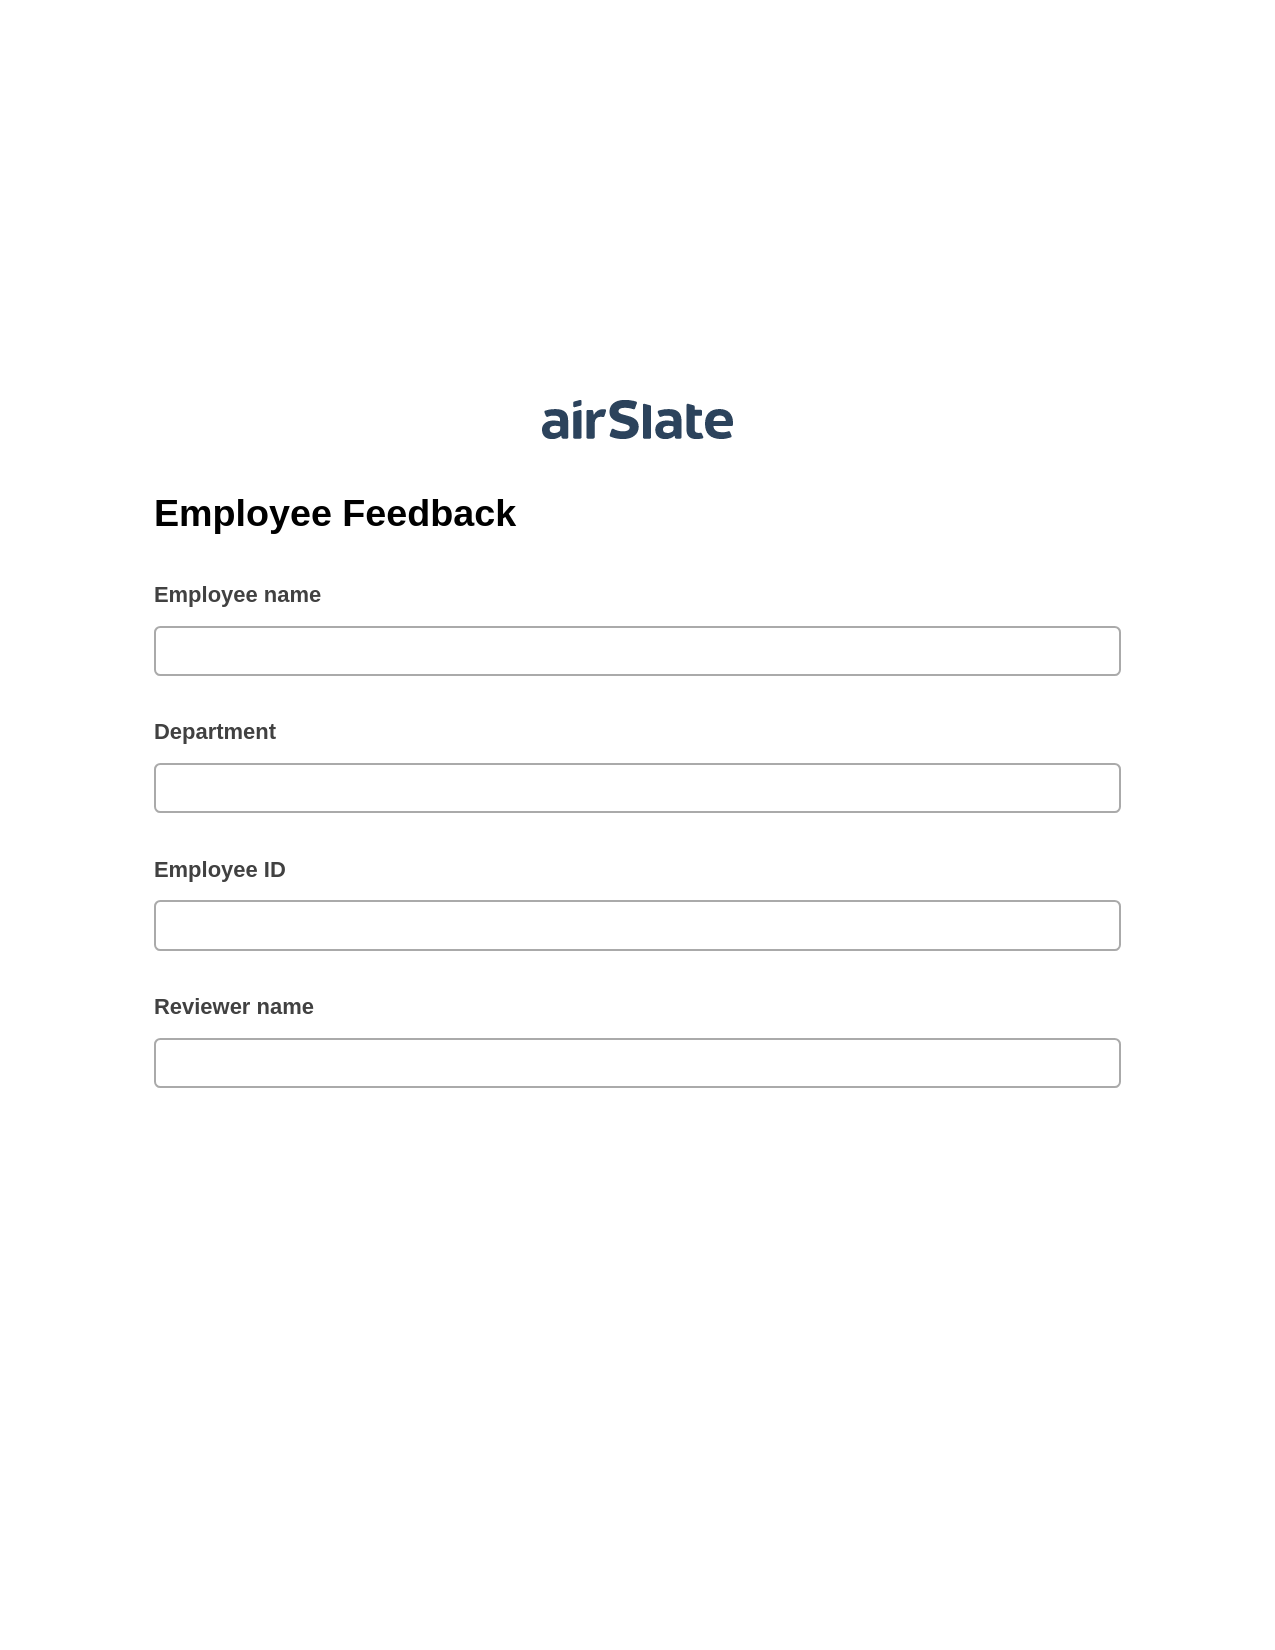 Multirole Employee Feedback Pre-fill from Google Sheet Dropdown Options Bot, System Bot - Create a Slate in another Flow, Webhook Postfinish Bot